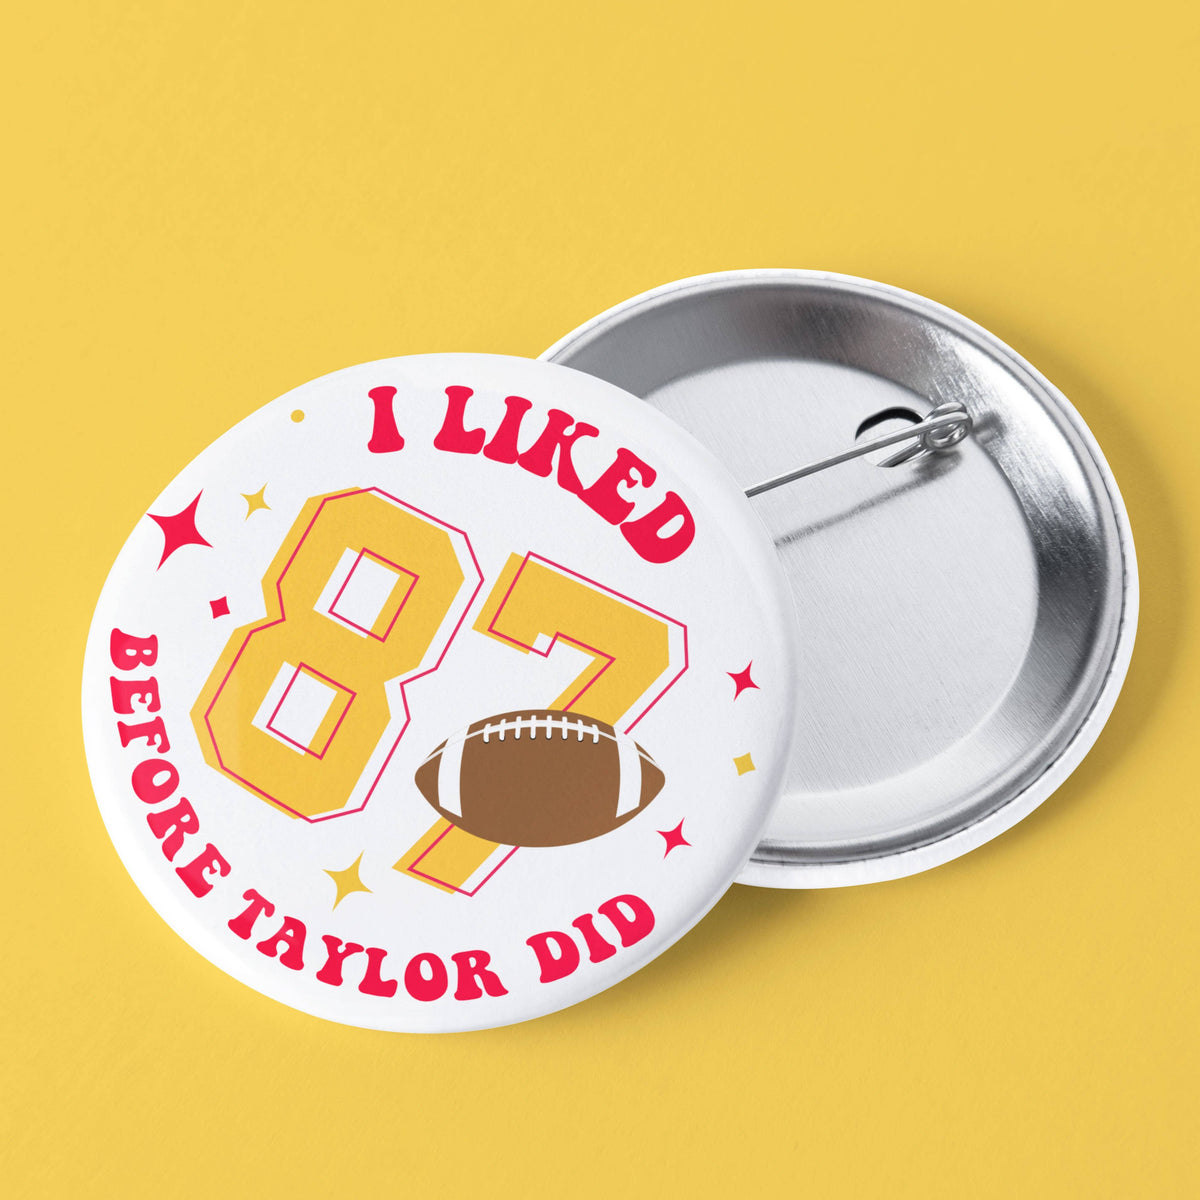 I Liked 87 Before Taylor Did Pinback Button